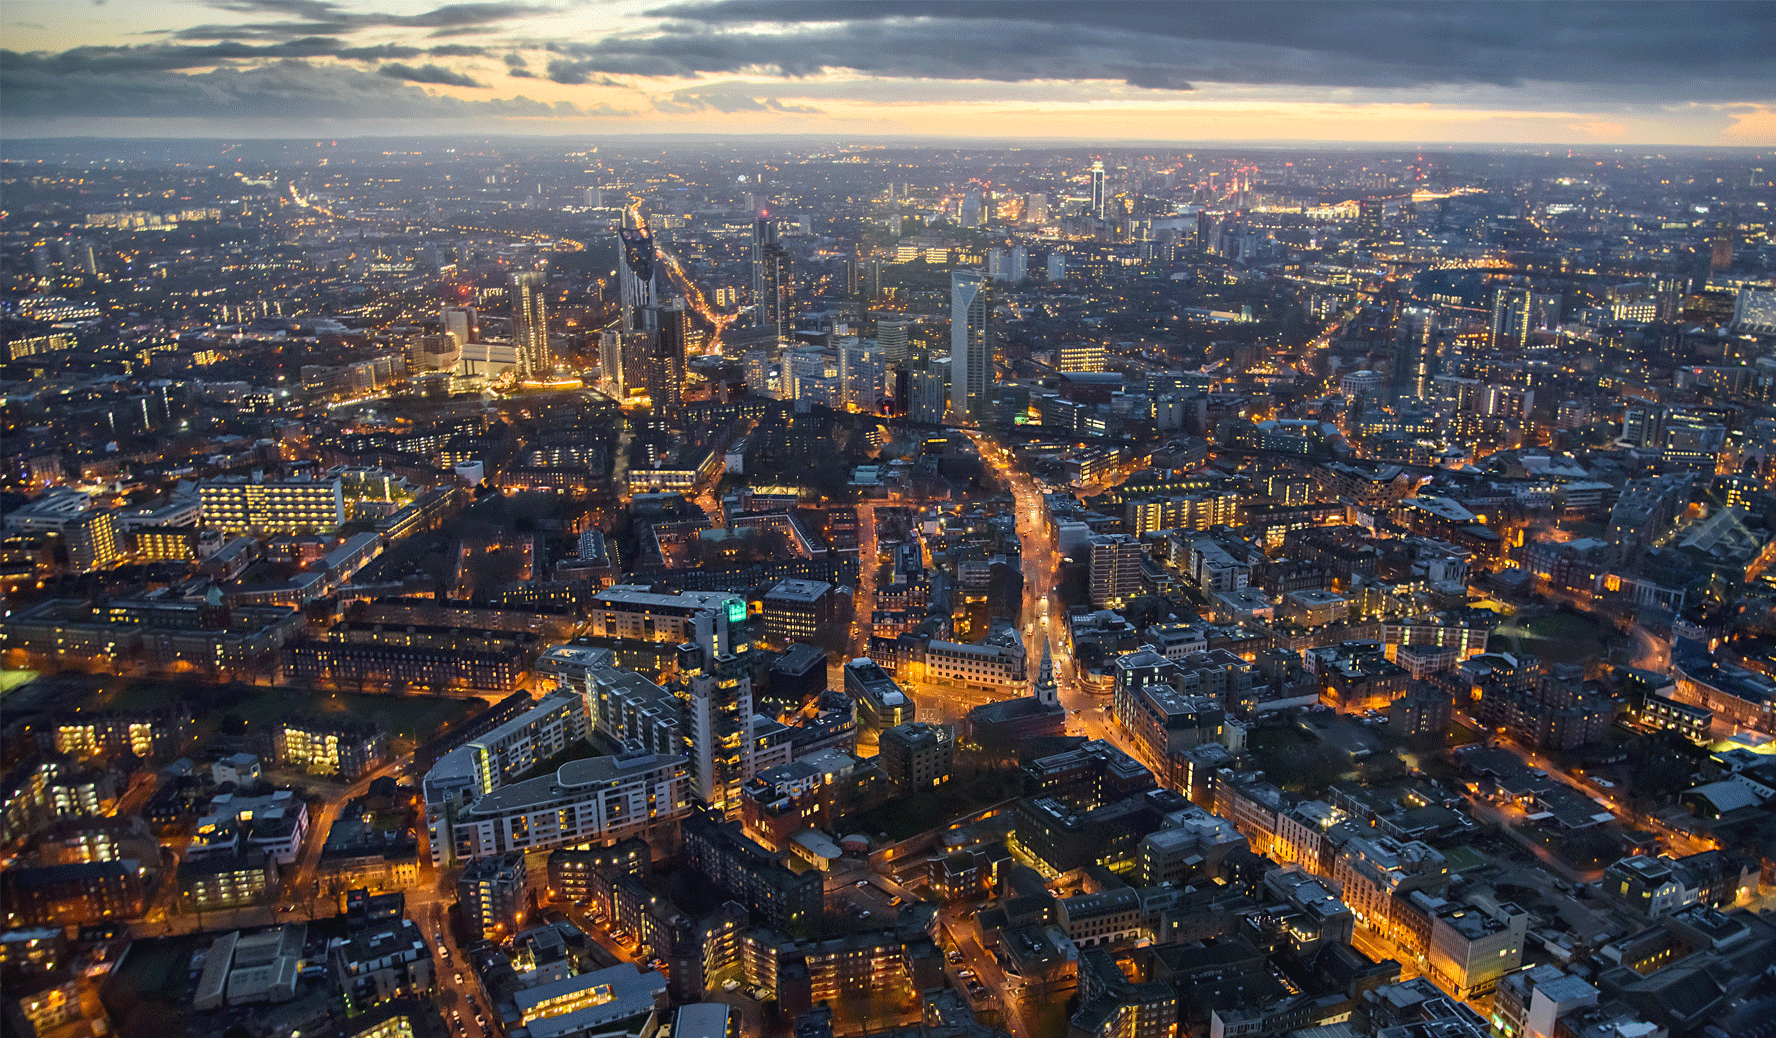 The city of London at night